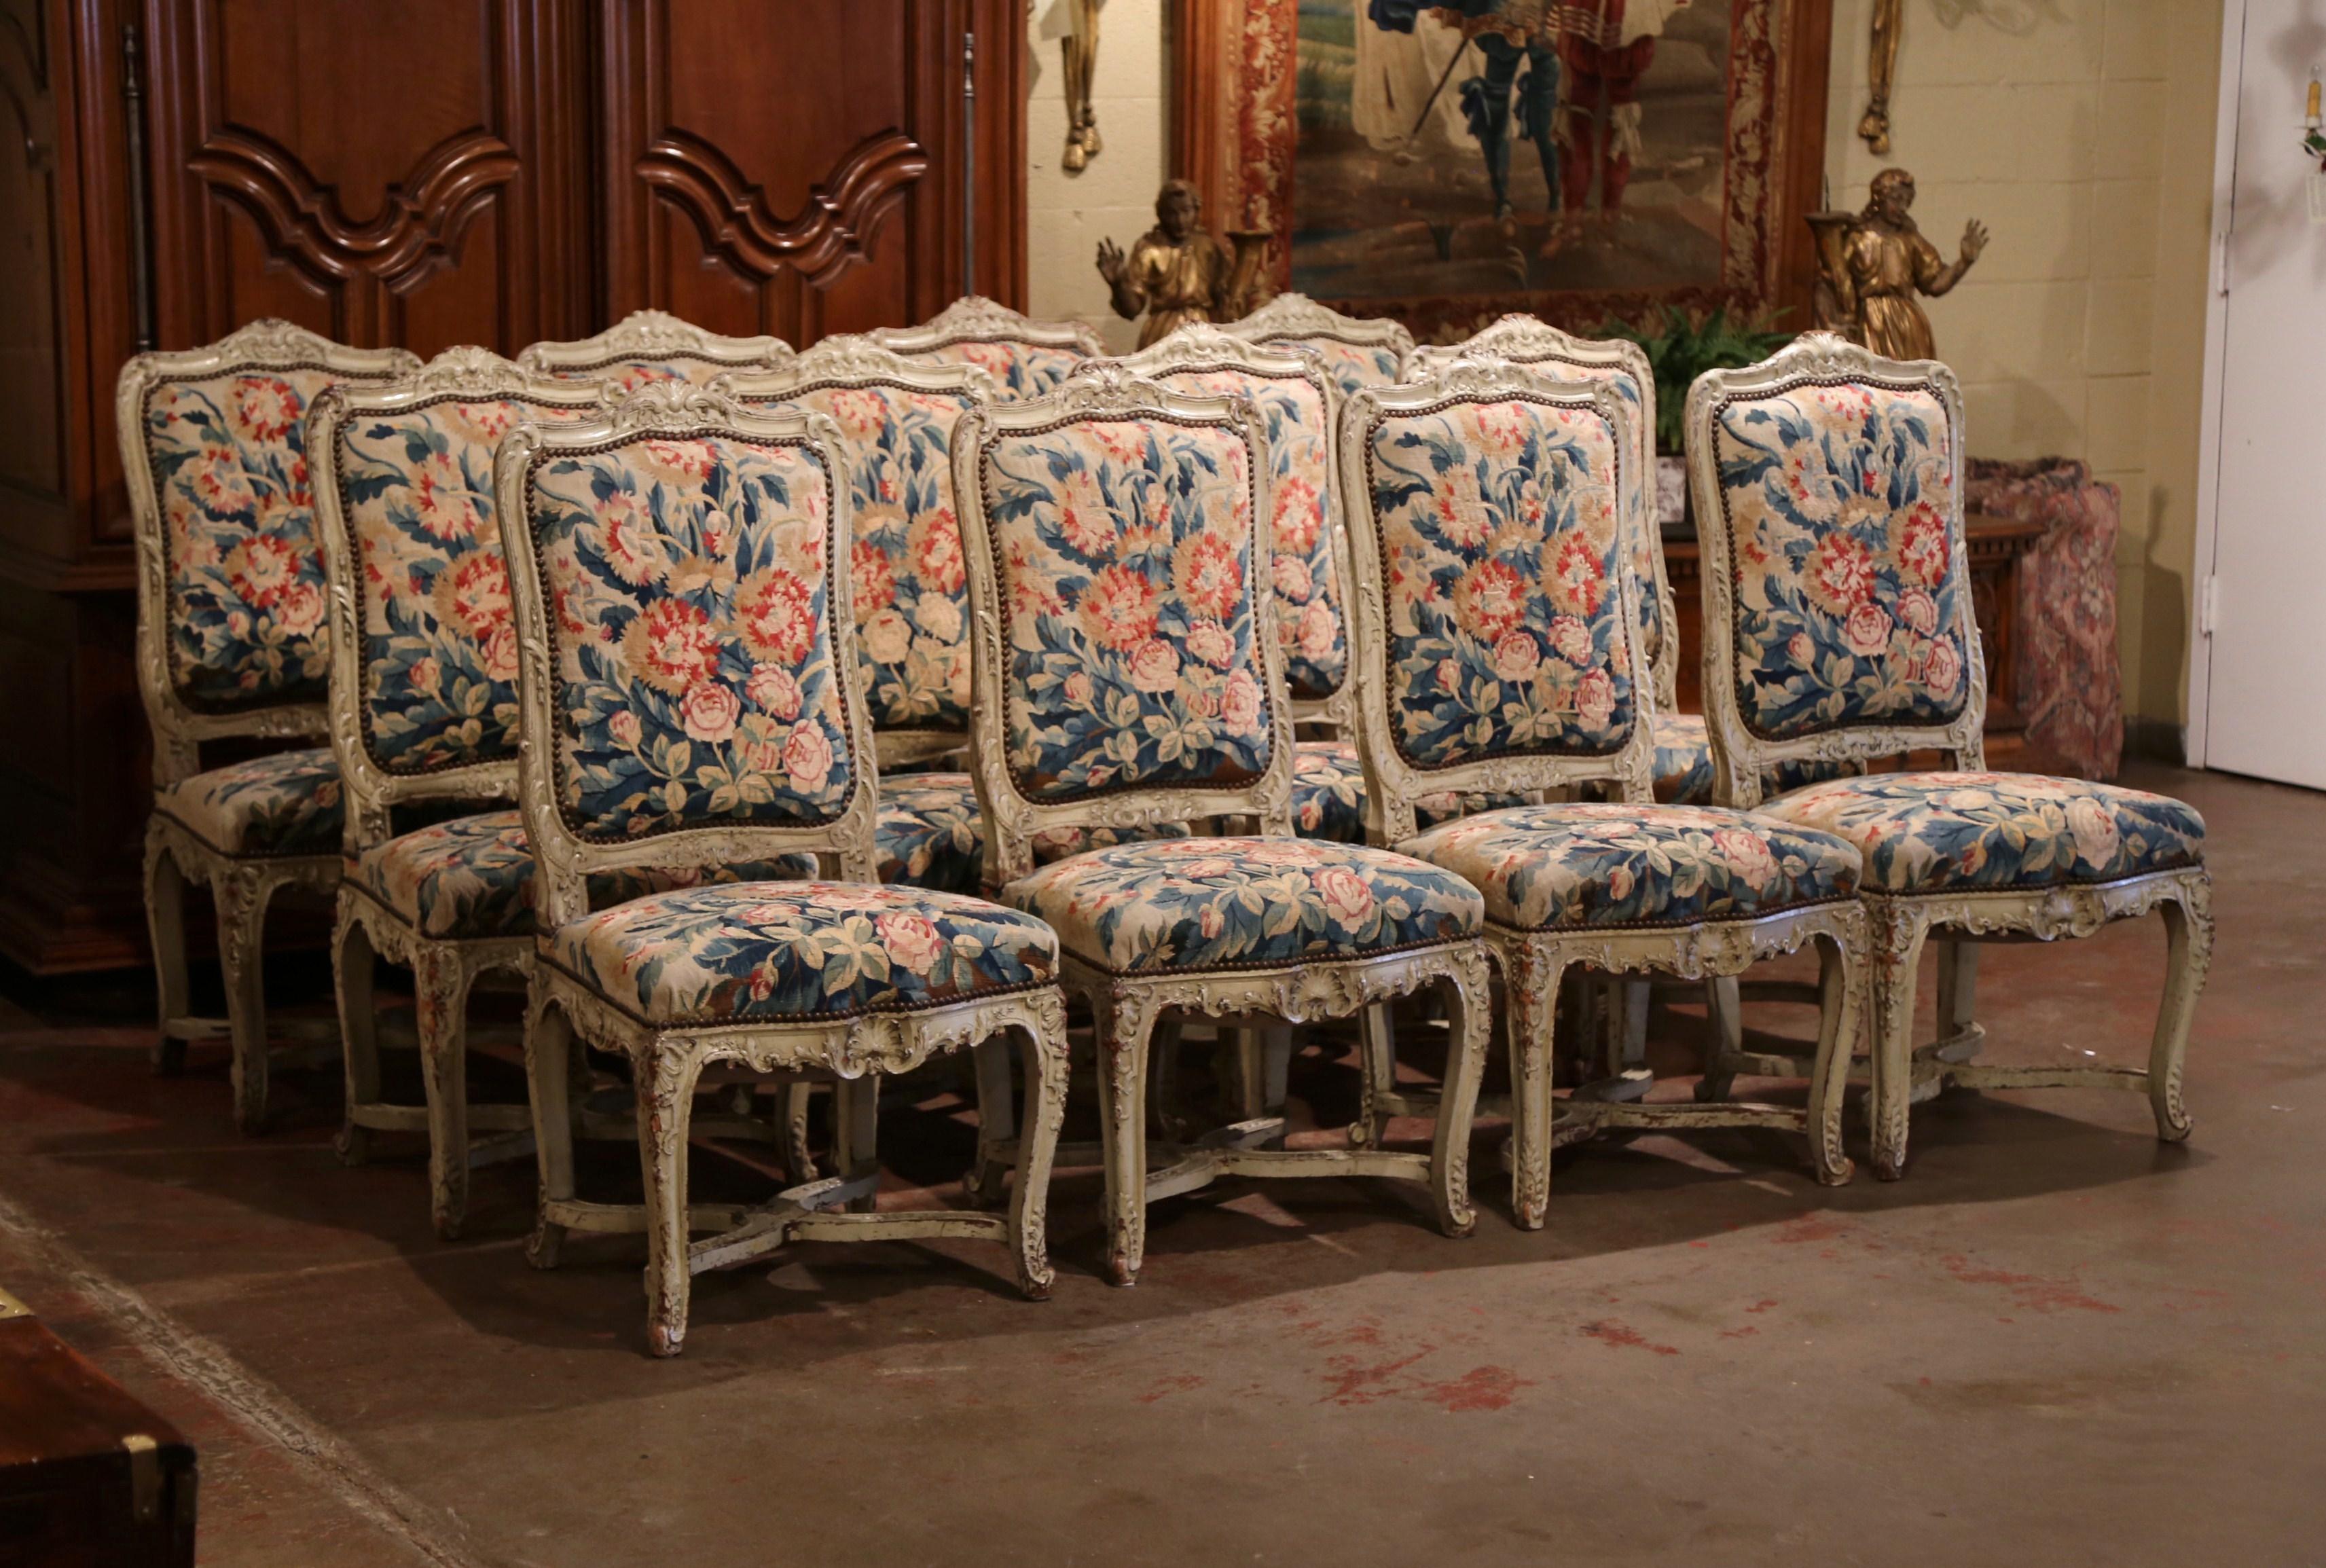 Hand-Painted 19th Century Carved Painted Dining Room Chairs with Aubusson Tapestry -Set of 12